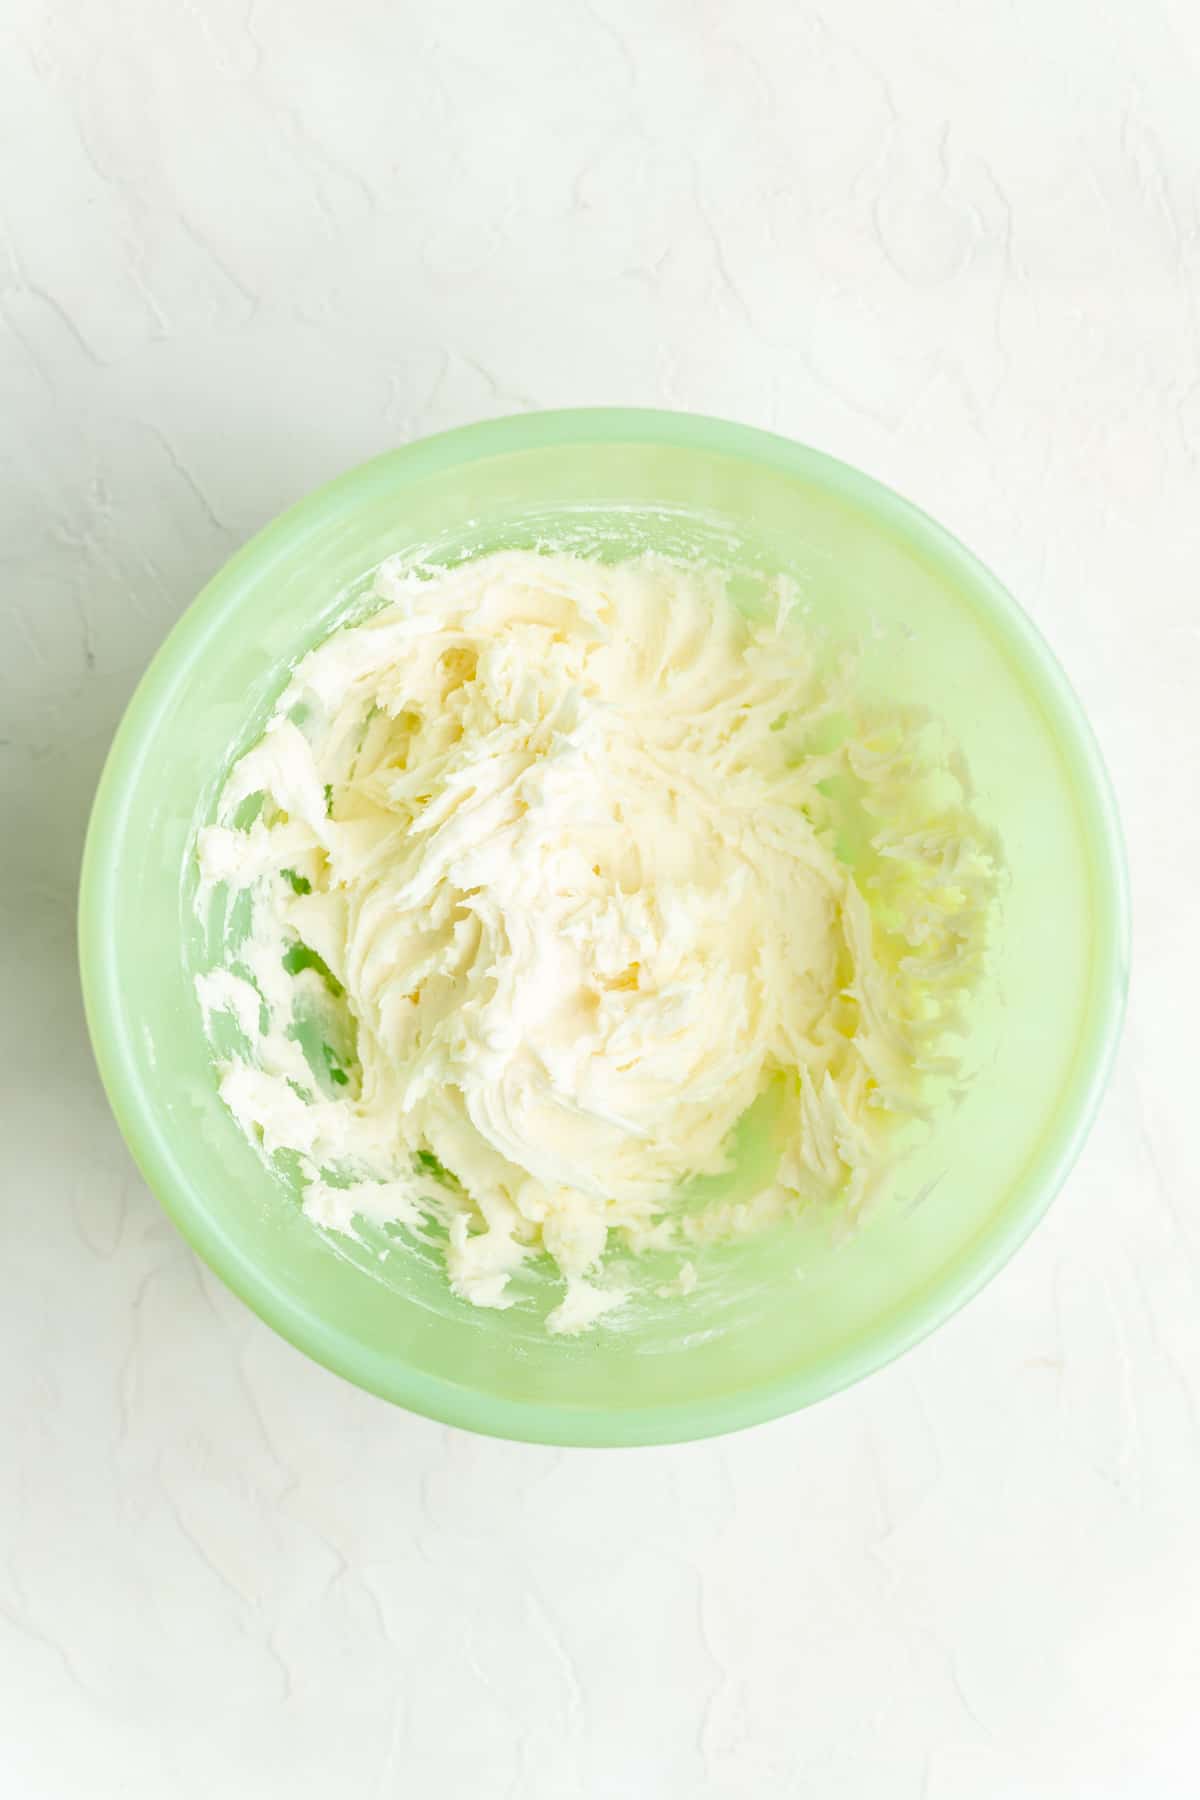 Partially mixed cream cheese icing in green mixing bowl on white background.